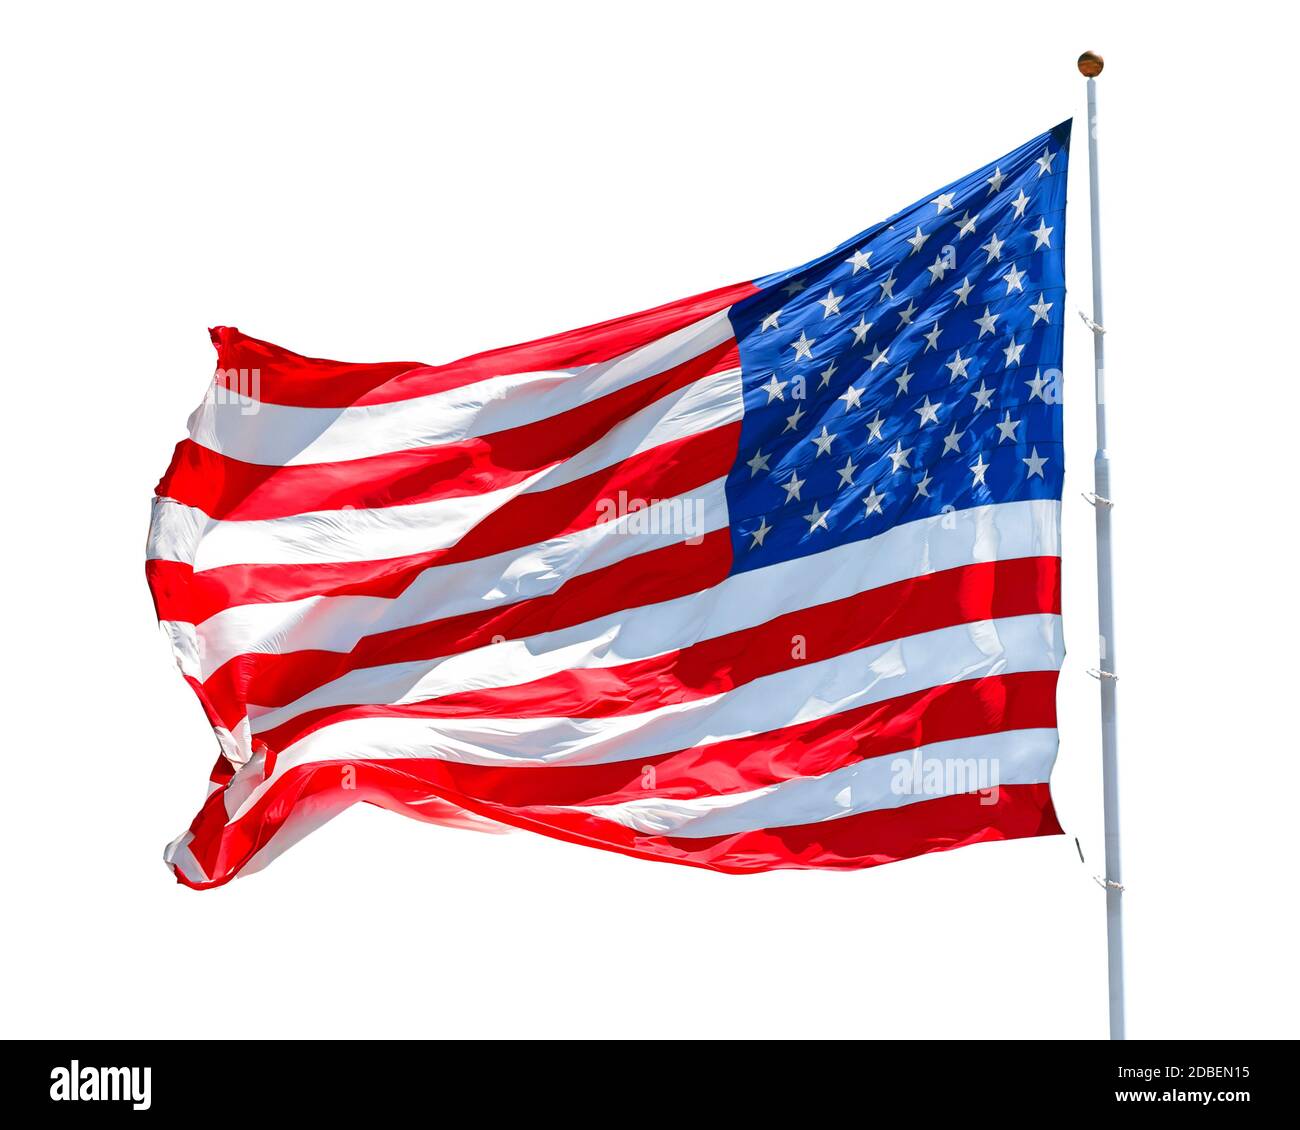 American flag waving in the wind isolated on white background, US flag motion close-up, red white blue flag outdoors in sunlight. United States of America national flag. USA stars and stripes Stock Photo